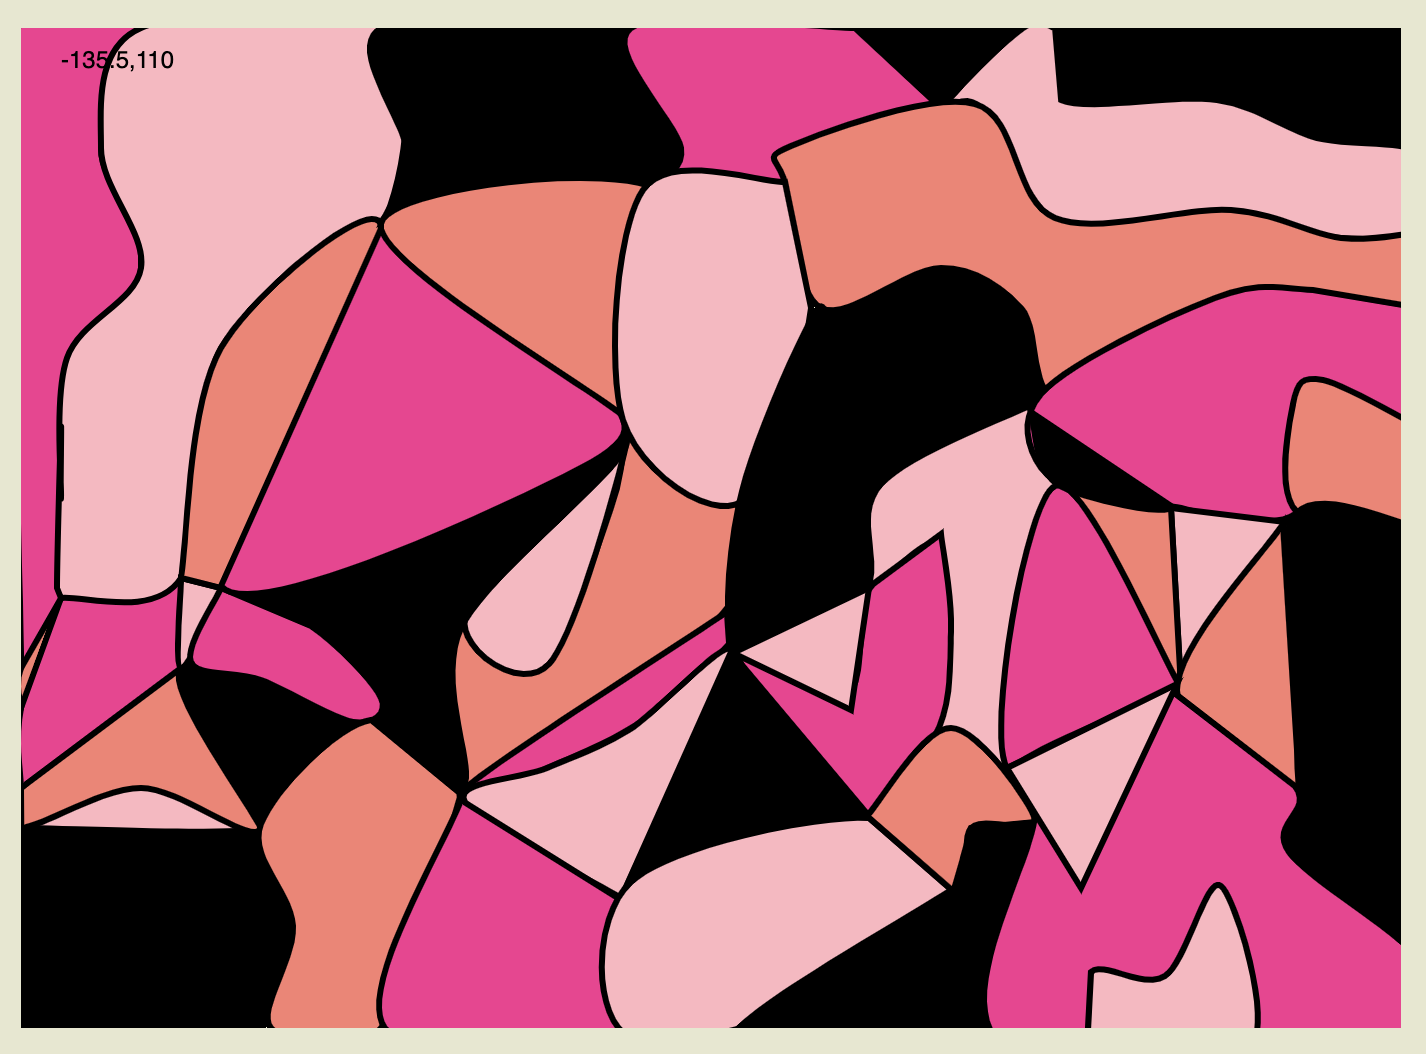 Different shades of pink, brown, and orange curved shapes.